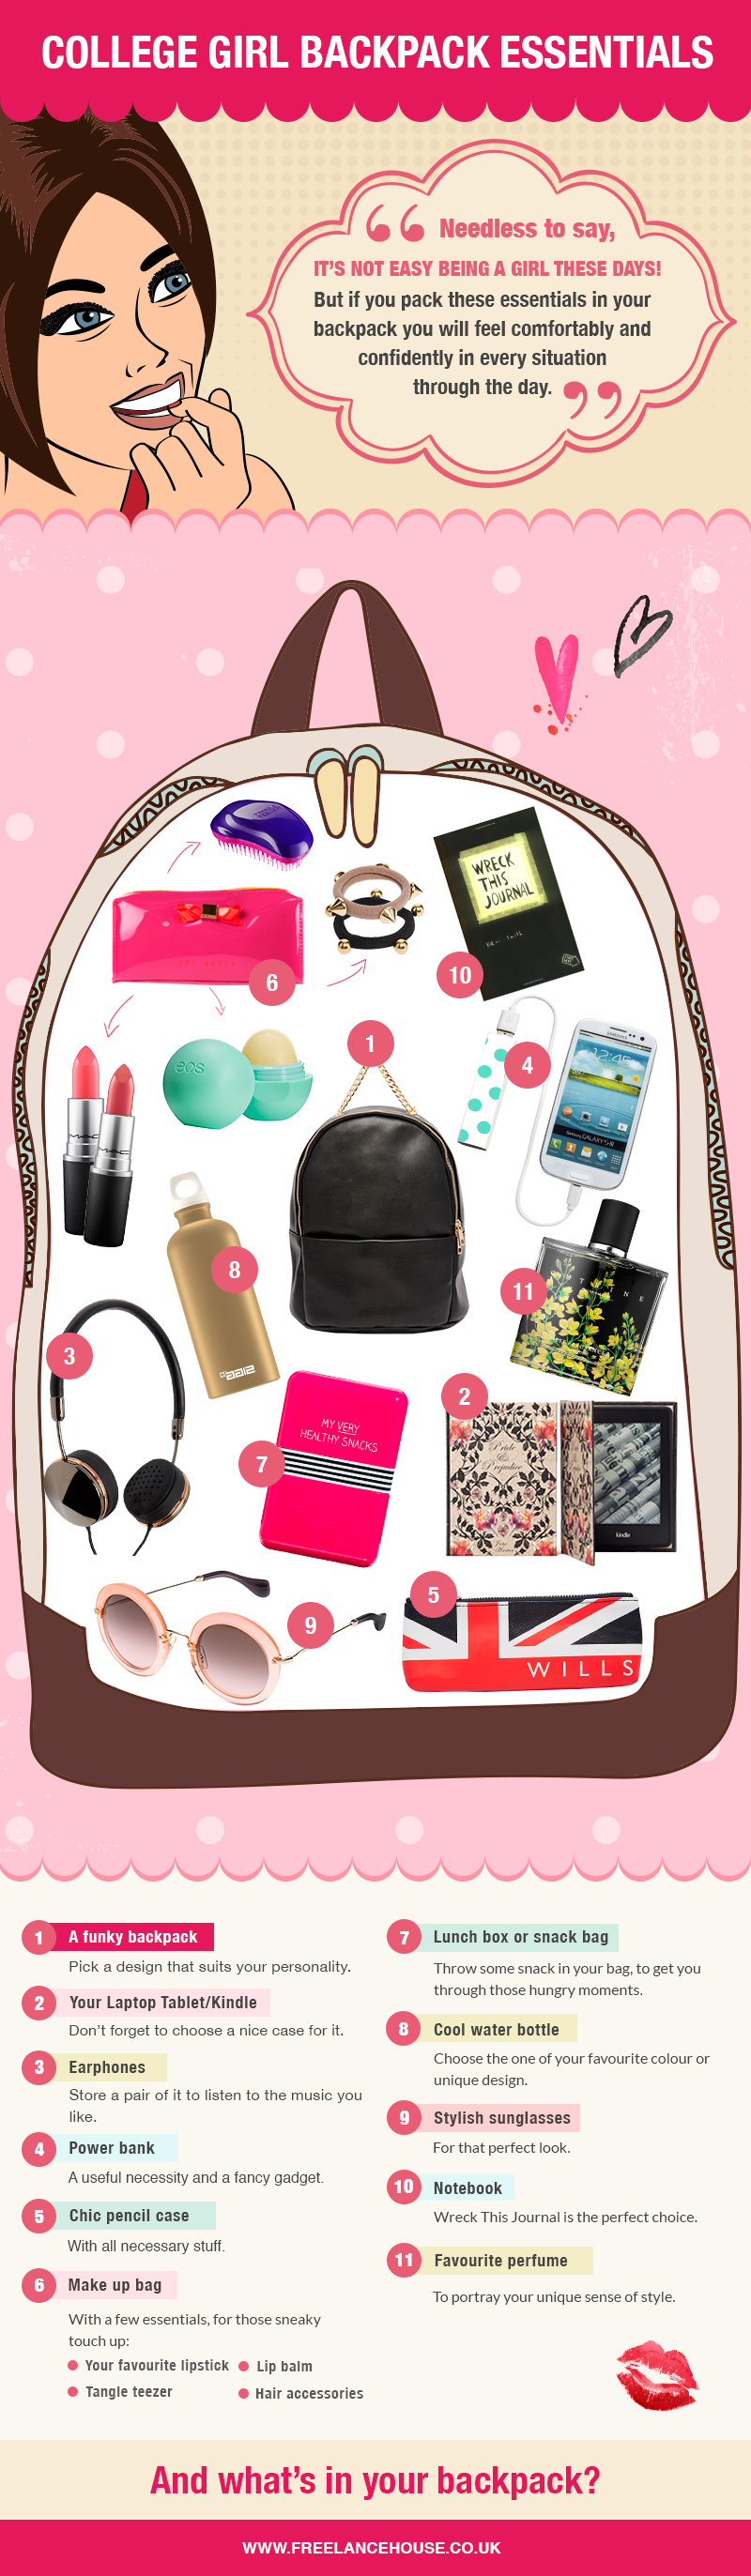 College Girl Backpack Essentials Contest - FreelanceHouse Blog